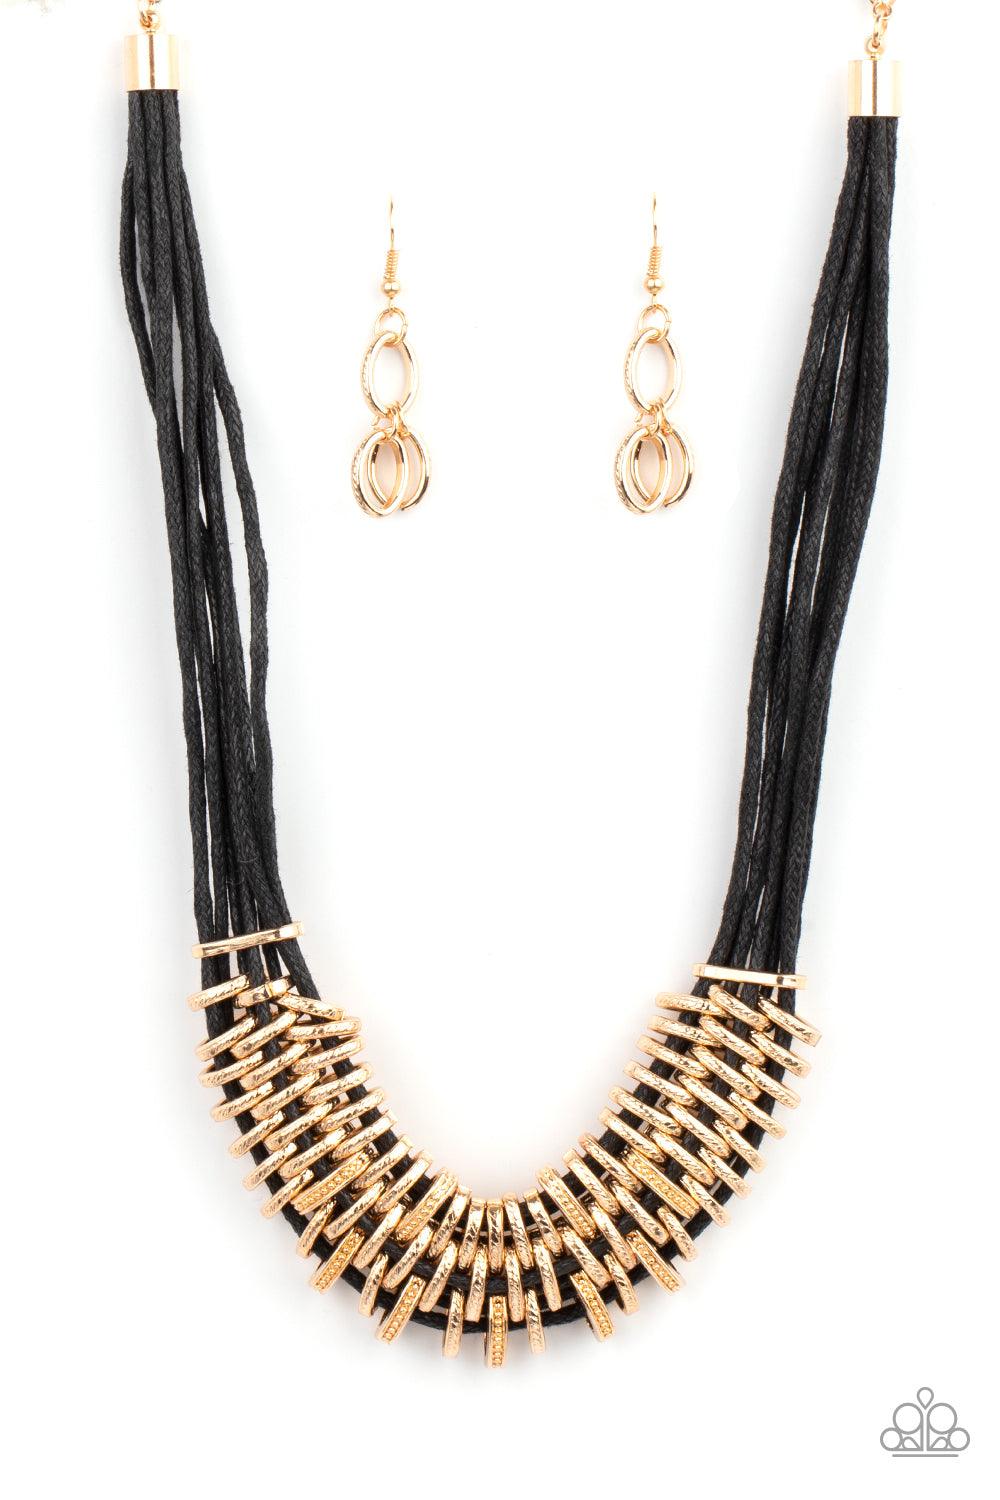 Paparazzi Accessories Lock, Stock, and SPARKLE - Gold Bold and unapologetic, this hefty necklace gives off a hand-made feel with its multiple strands of black cording held together by industrial gold fittings that shift and slide. Features an adjustable c